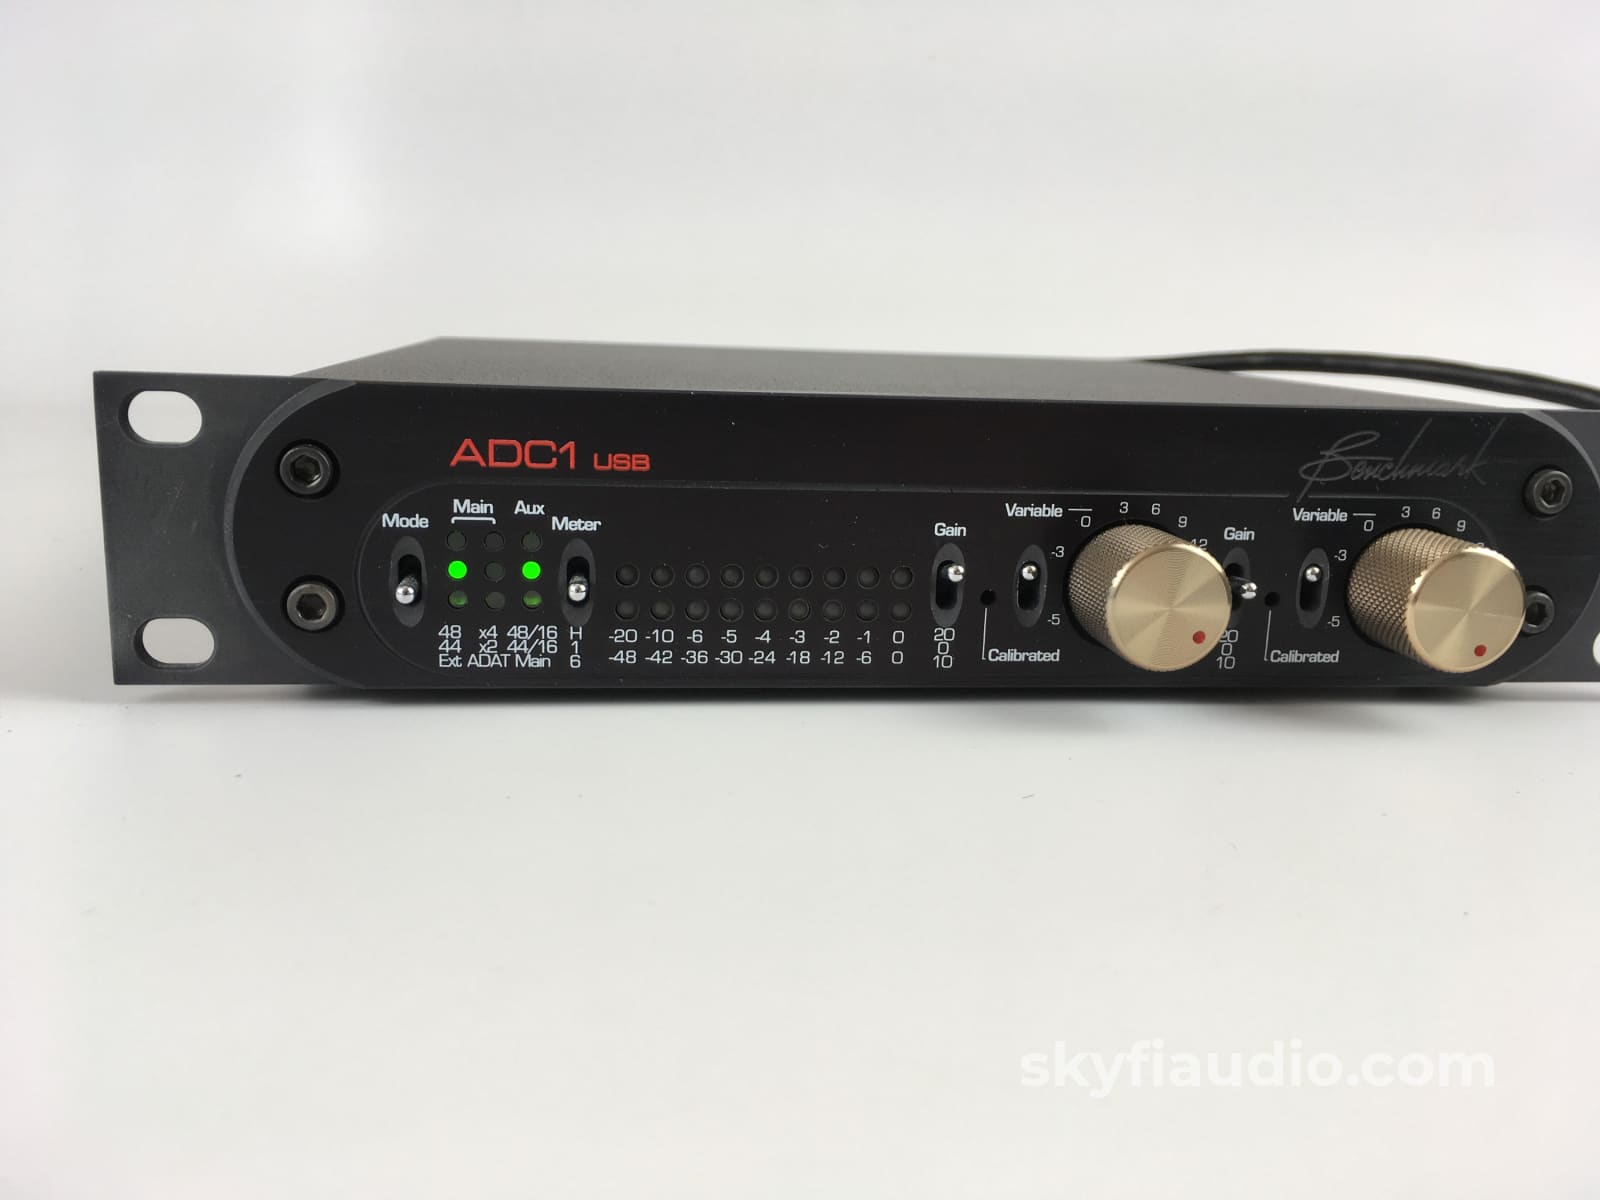 Benchmark Adc1-Usb Analogue To Digital Converter Amplifier